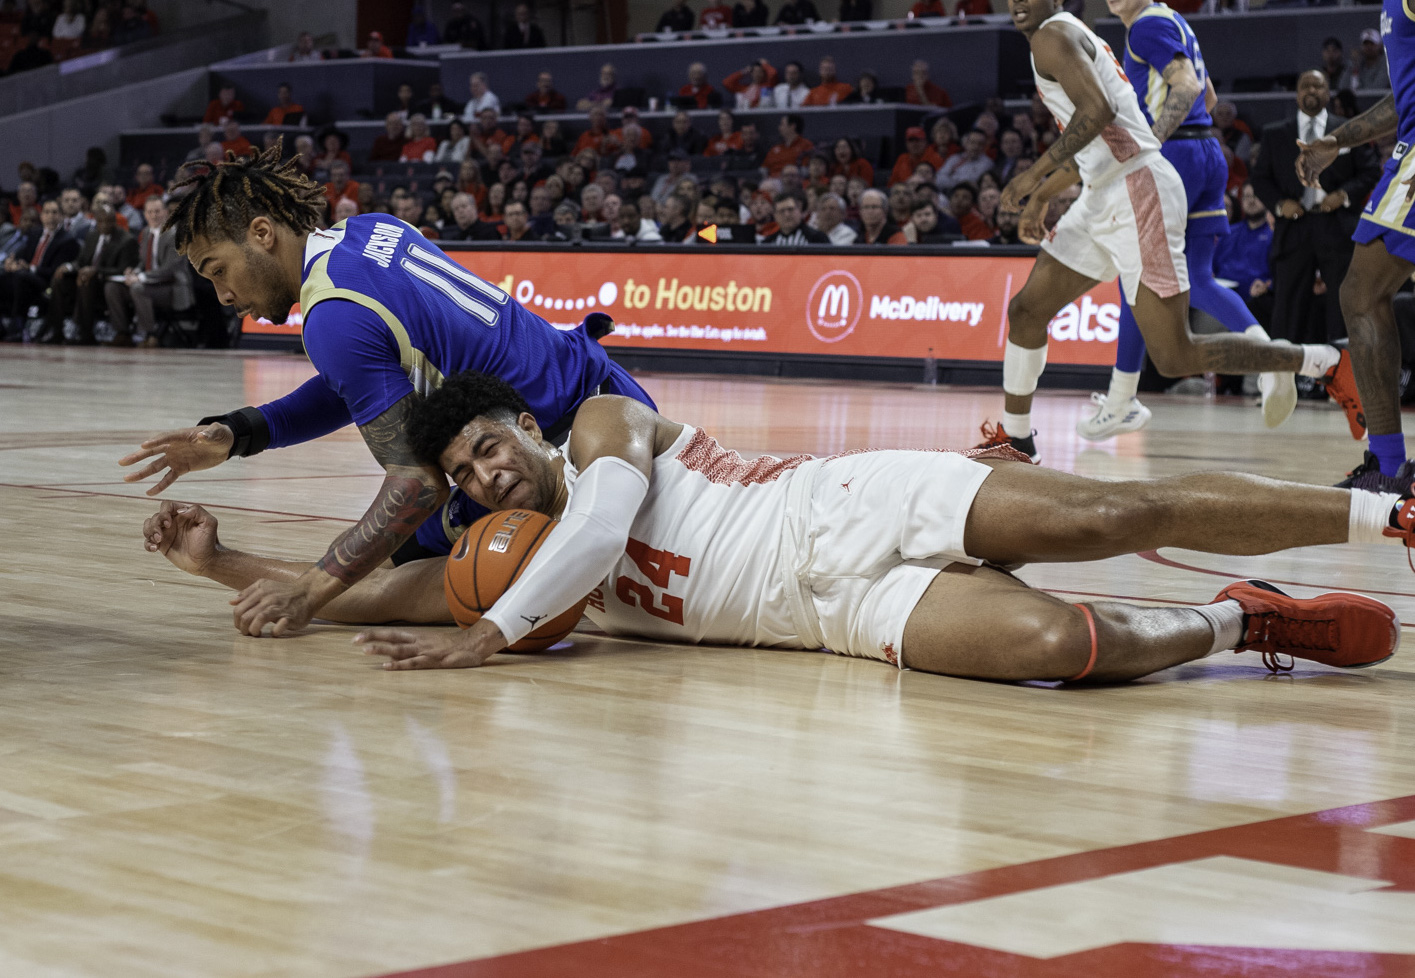 Houston guard Quentin Grimes dives on the floor and secures a loose ball in a game at Fertitta Center during the 2019-20 season. | File Photo